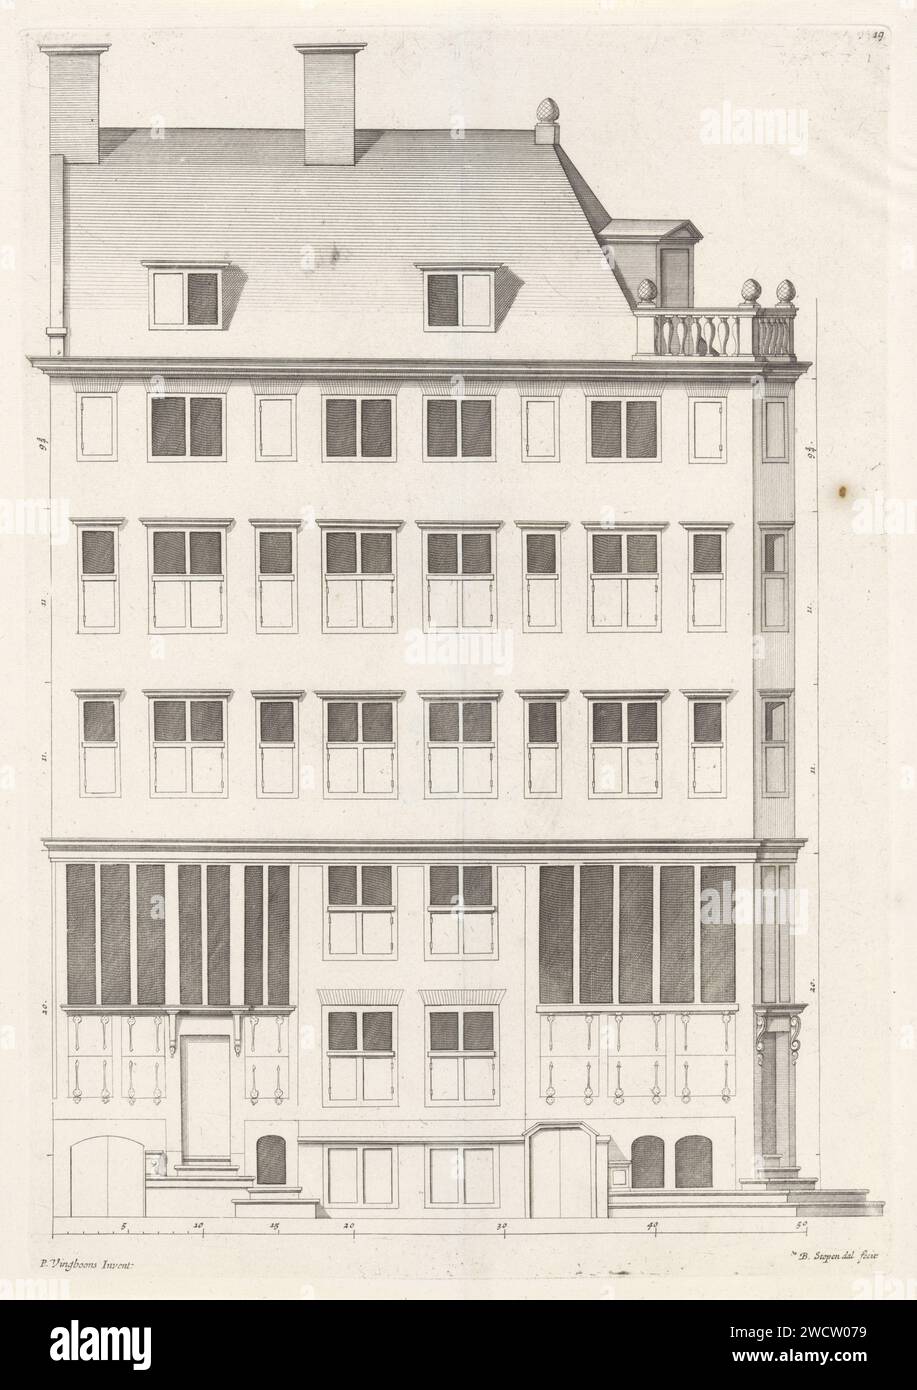 Facade of a house in Amsterdam, Bastiaen Stopendael, after Philips VinckBoons (II), 1674 print Facade along the tide canal, now Prins Hendrikkade, built by order of Maarten Fransz. van der Schilde in 1649-1650. This building was on the site of the current Scheepvaarthuis. The house was designed by Philips Vingboons. Amsterdam paper etching / engraving exterior  architectural design or model Amsterdam Stock Photo